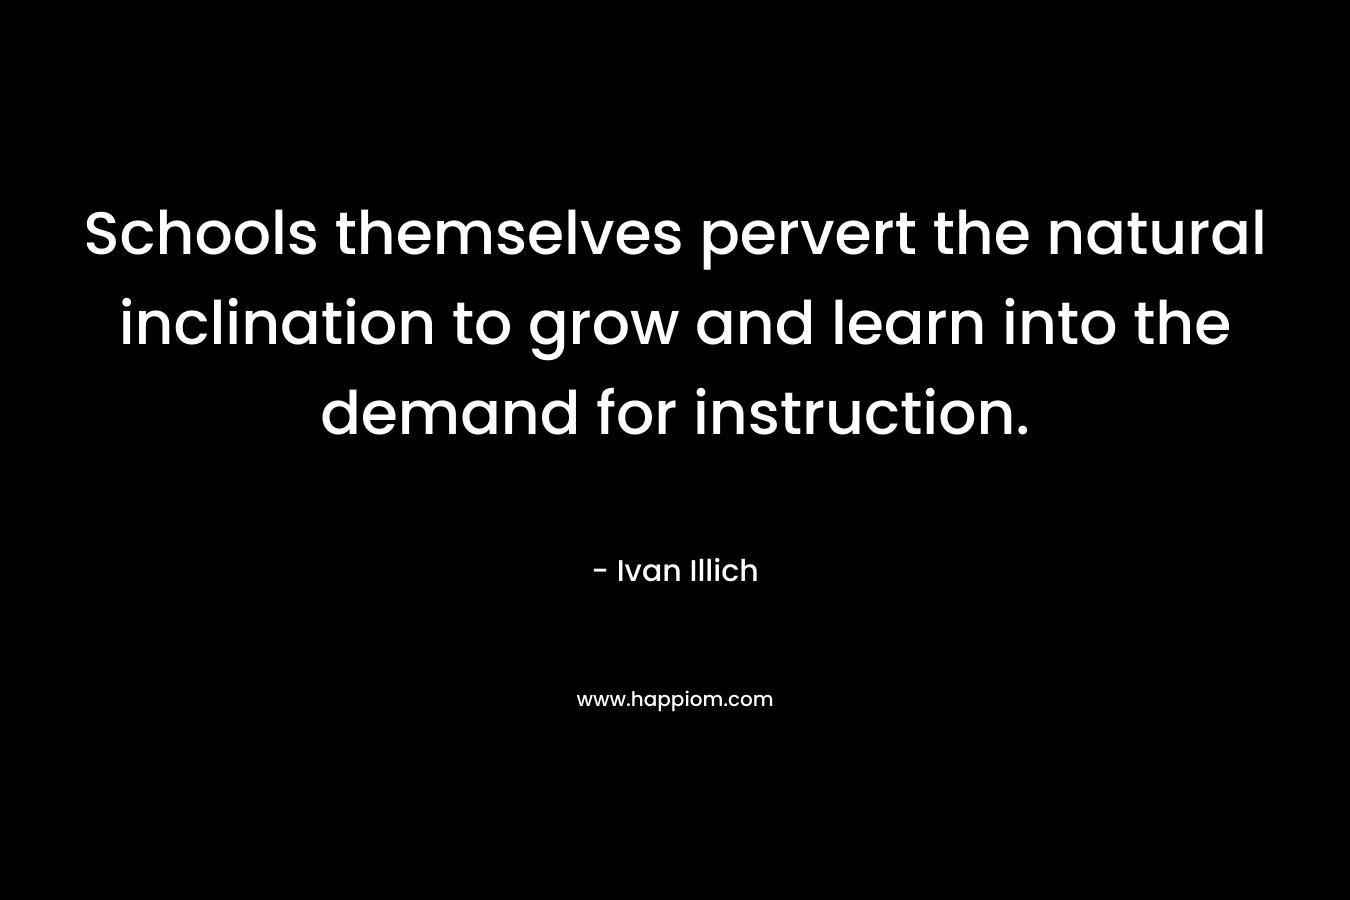 Schools themselves pervert the natural inclination to grow and learn into the demand for instruction. – Ivan Illich